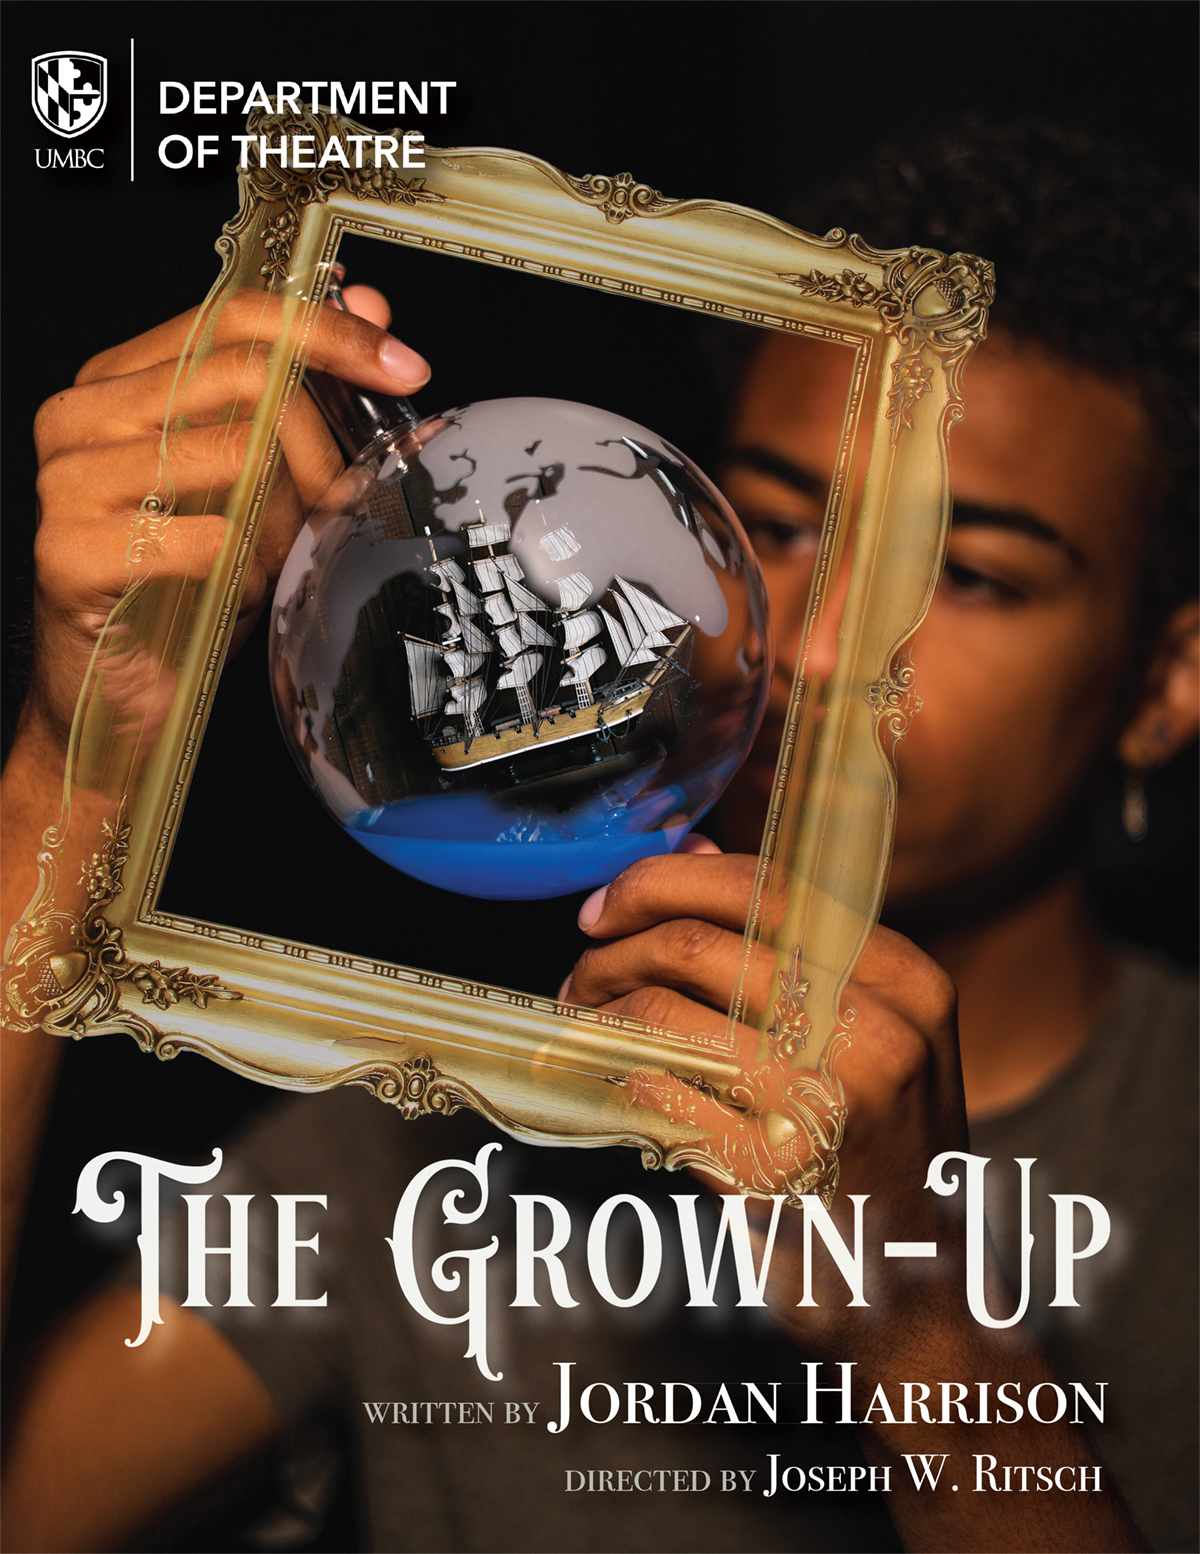 A man gazes at a ship in a bottle, with a frame around it. Words say UMBC Department of Theatre, The Grown-Up, Written by Jordan Harrison, Directed by Joseph W. Ritsch